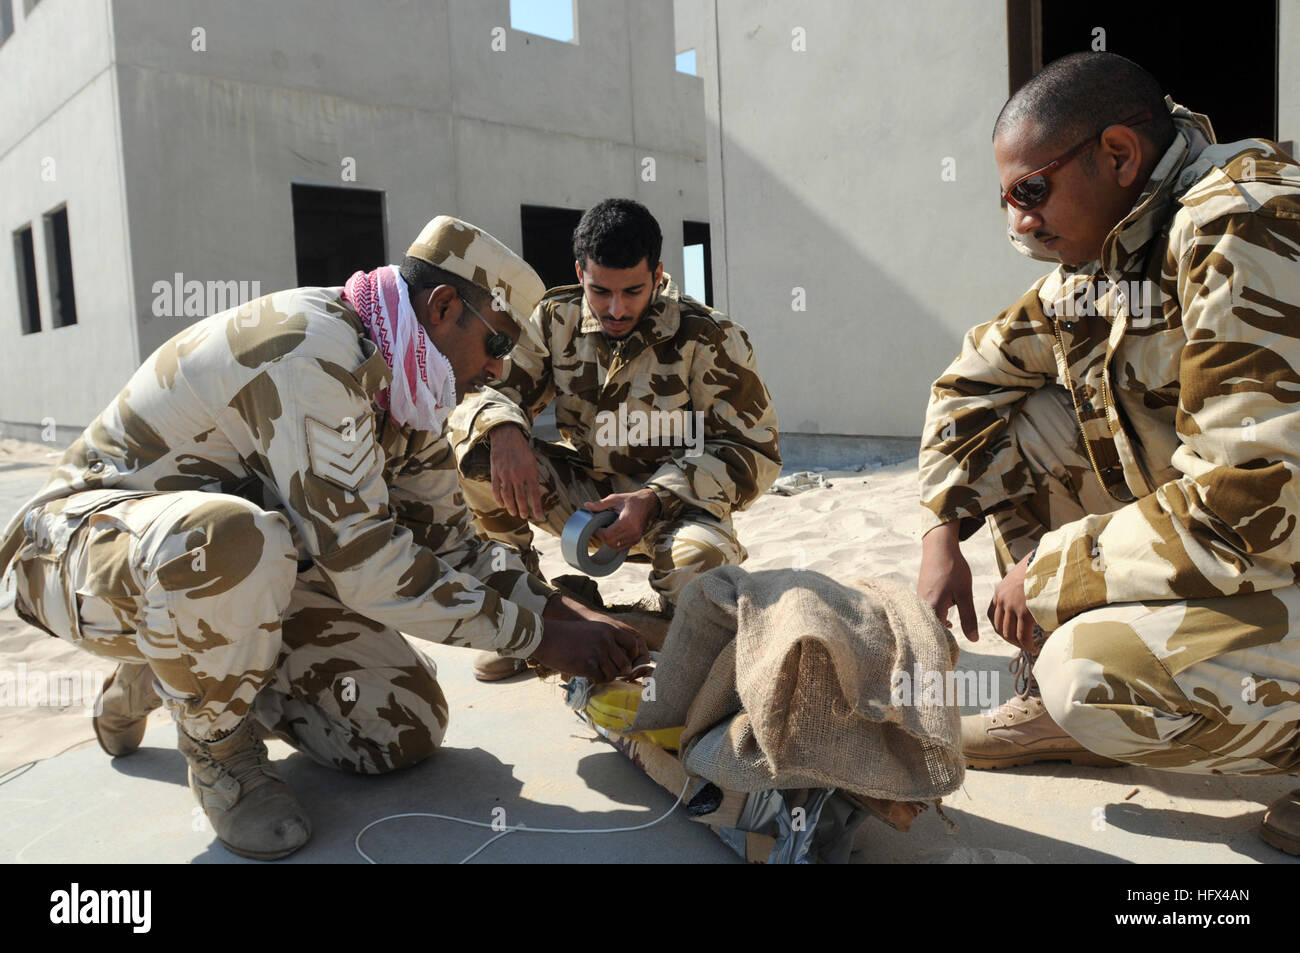 090115-N-8730P-006 BAHRAIN (Jan. 15, 2009) Bahrain Royal Field Engineers examine a simulated improvised explosive device (IED) as part of a bomb disposal training scenario given by Explosive Ordnance Disposal Mobile Unit (EODMU) 2 at a Bahraini military training range during Neon Response 2009. Neon Response is a bilateral explosive ordnance disposal (EOD) engagement between the U.S. Navy, Royal Bahrain Navy and Bahrain Defense Force Engineer Regiment EOD Forces. (U.S. Navy photo by Mass Communication Specialist 2nd Class Charles Panter/Released) US Navy 090115-N-8730P-006 Bahrain Royal Field  Stock Photo